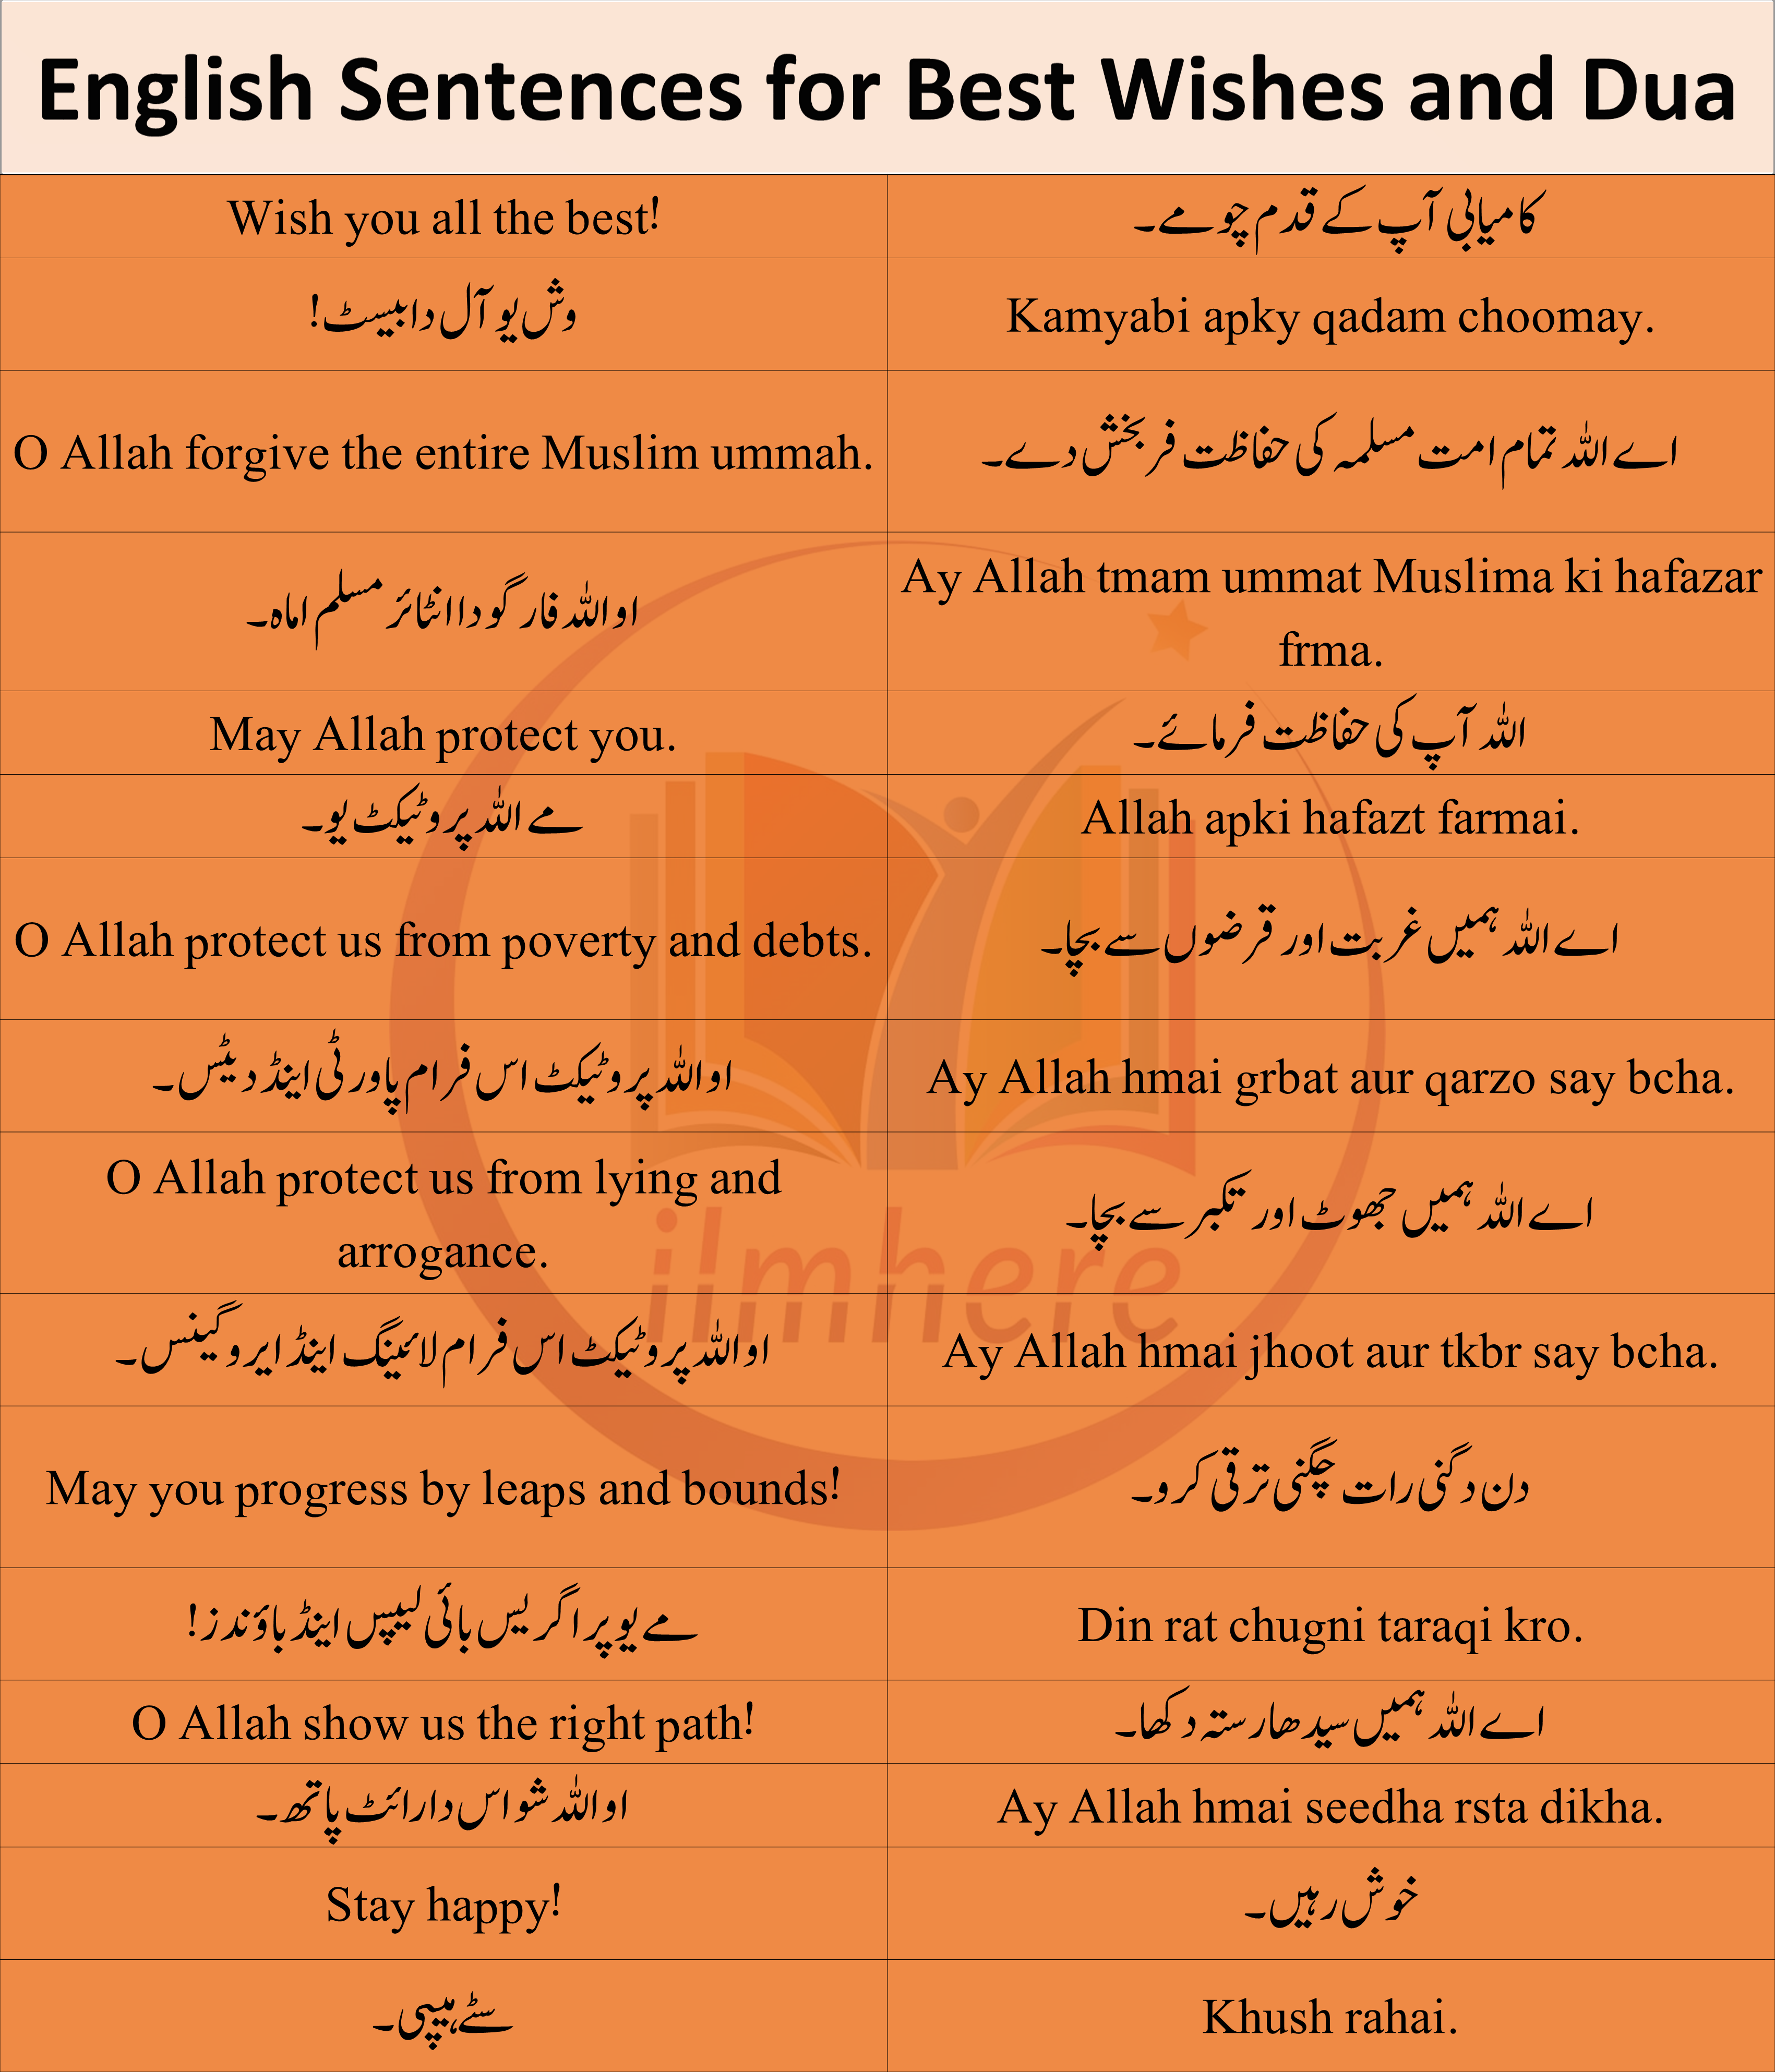 Here Is The Complete List Of Best Wishes And Dua Sentences In English, Urdu, and Hindi